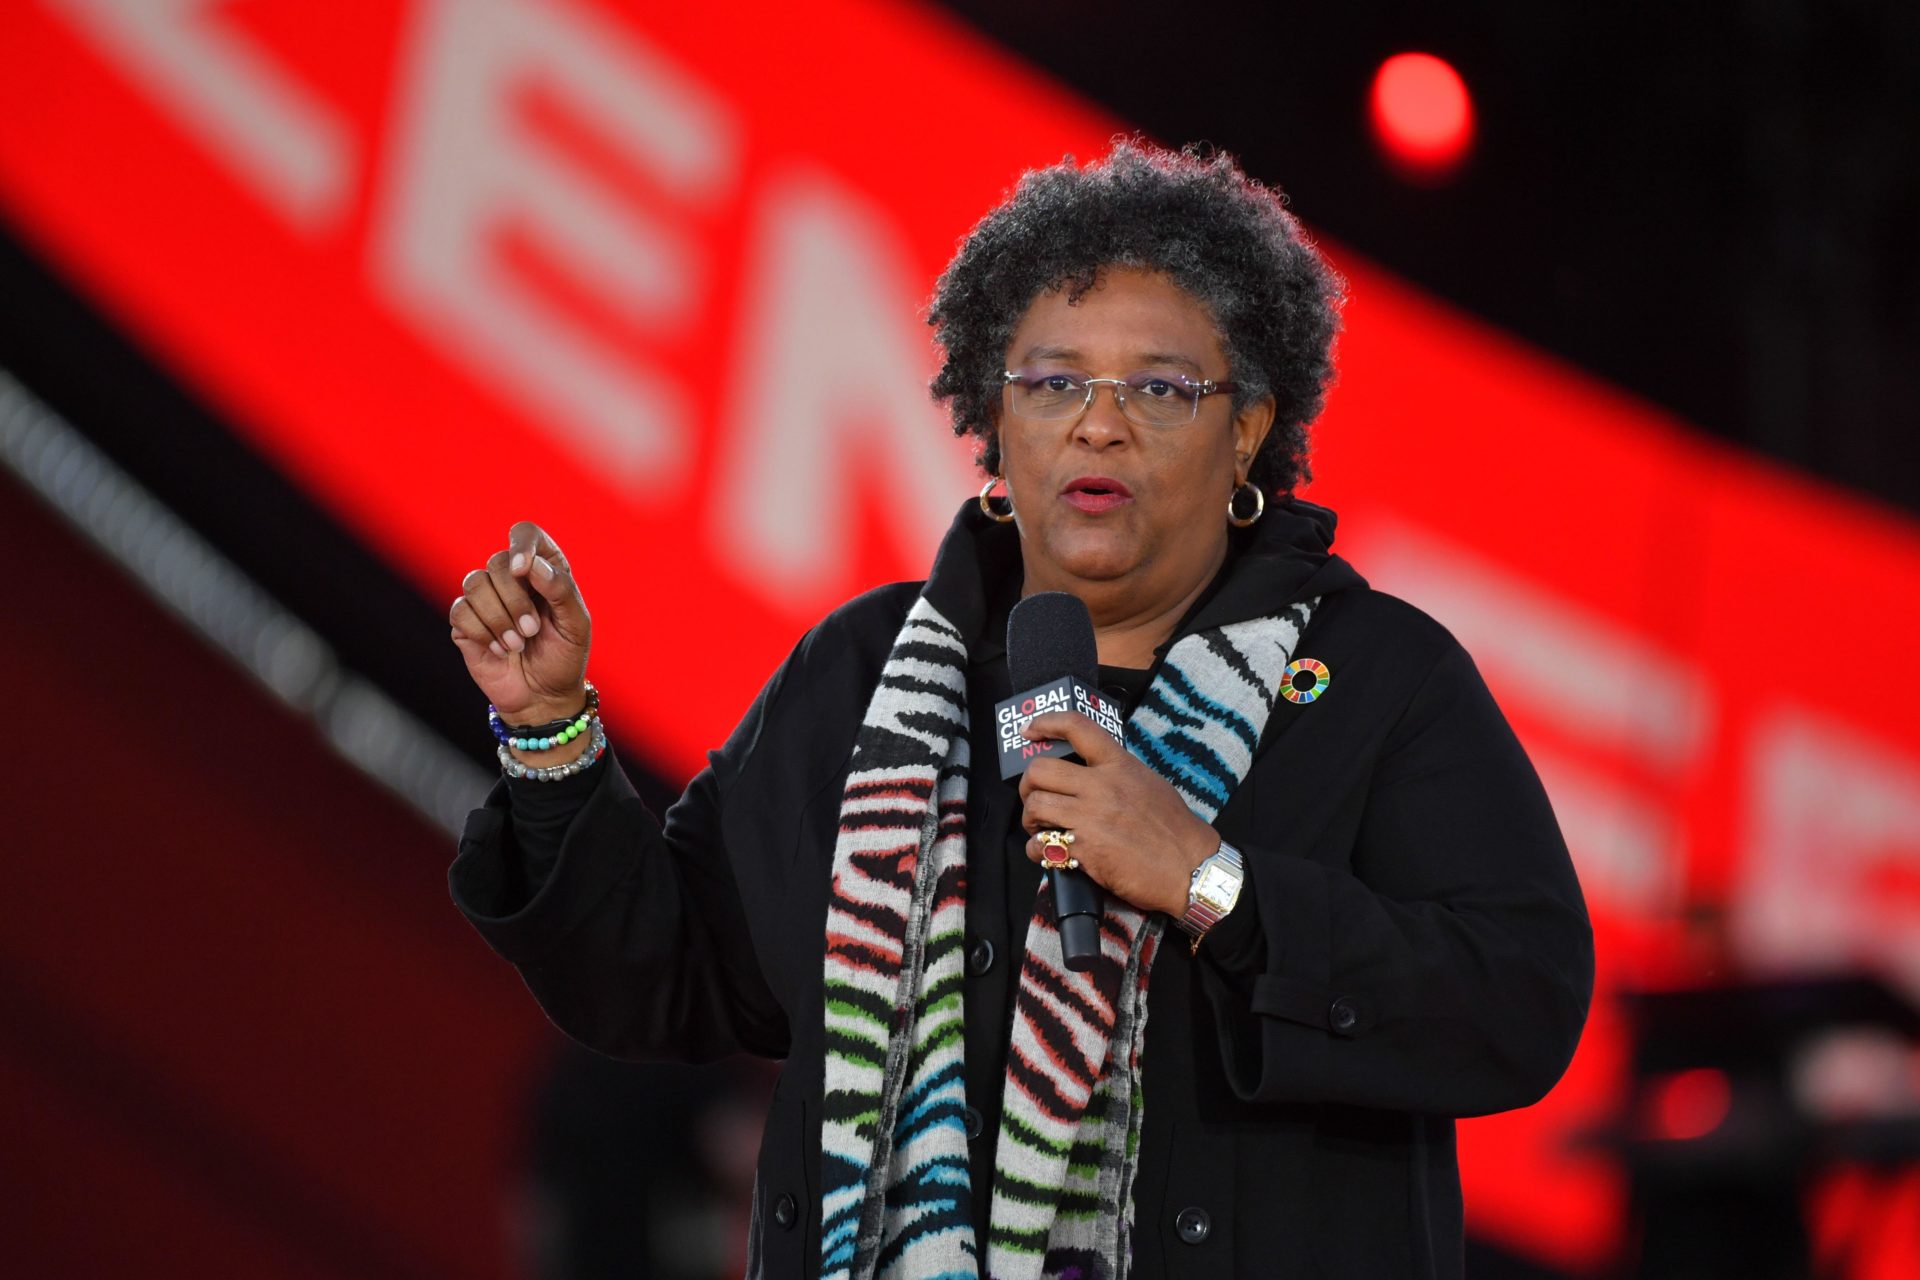 Barbados Prime Minister Mia Mottley at the 2022 Global Citizen Festival in Central Park, New York, 24-11-2022. Image: Erik Pendzich / Alamy